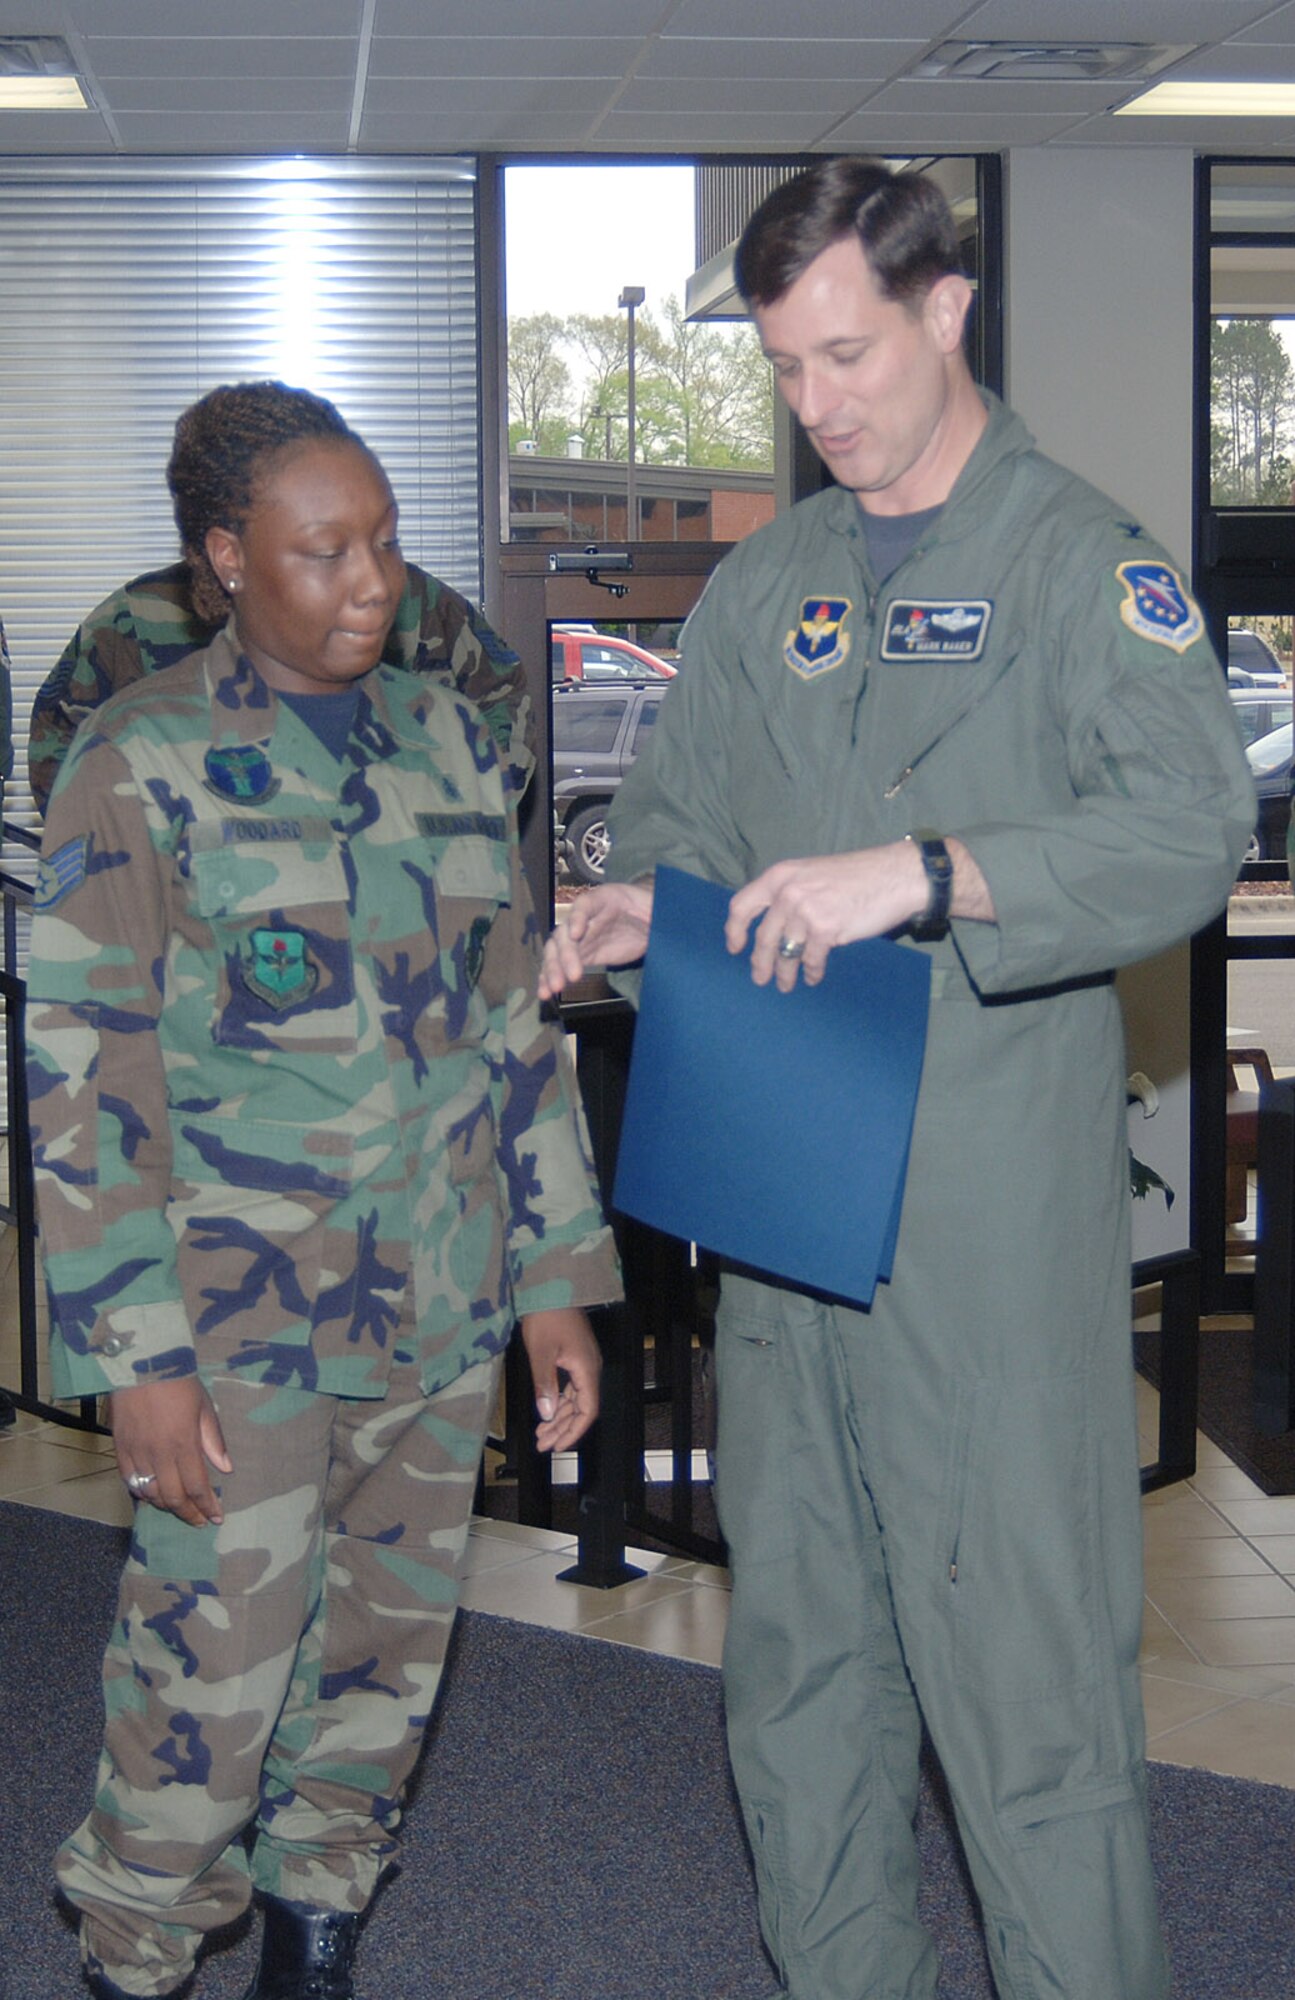 Tech. Sgt. Kimona Woodard, 14th Medical Support Squadron, was surprised by Col. Mark Baker, 14th Flying Training Wing Vice Commander, with a Stripes to Exceptional Performers promotion Monday at the 14th Medical Group clinic. She was promoted in front of the entire 14th Medical Group during what she believed was a brief on an upcoming exercise. 